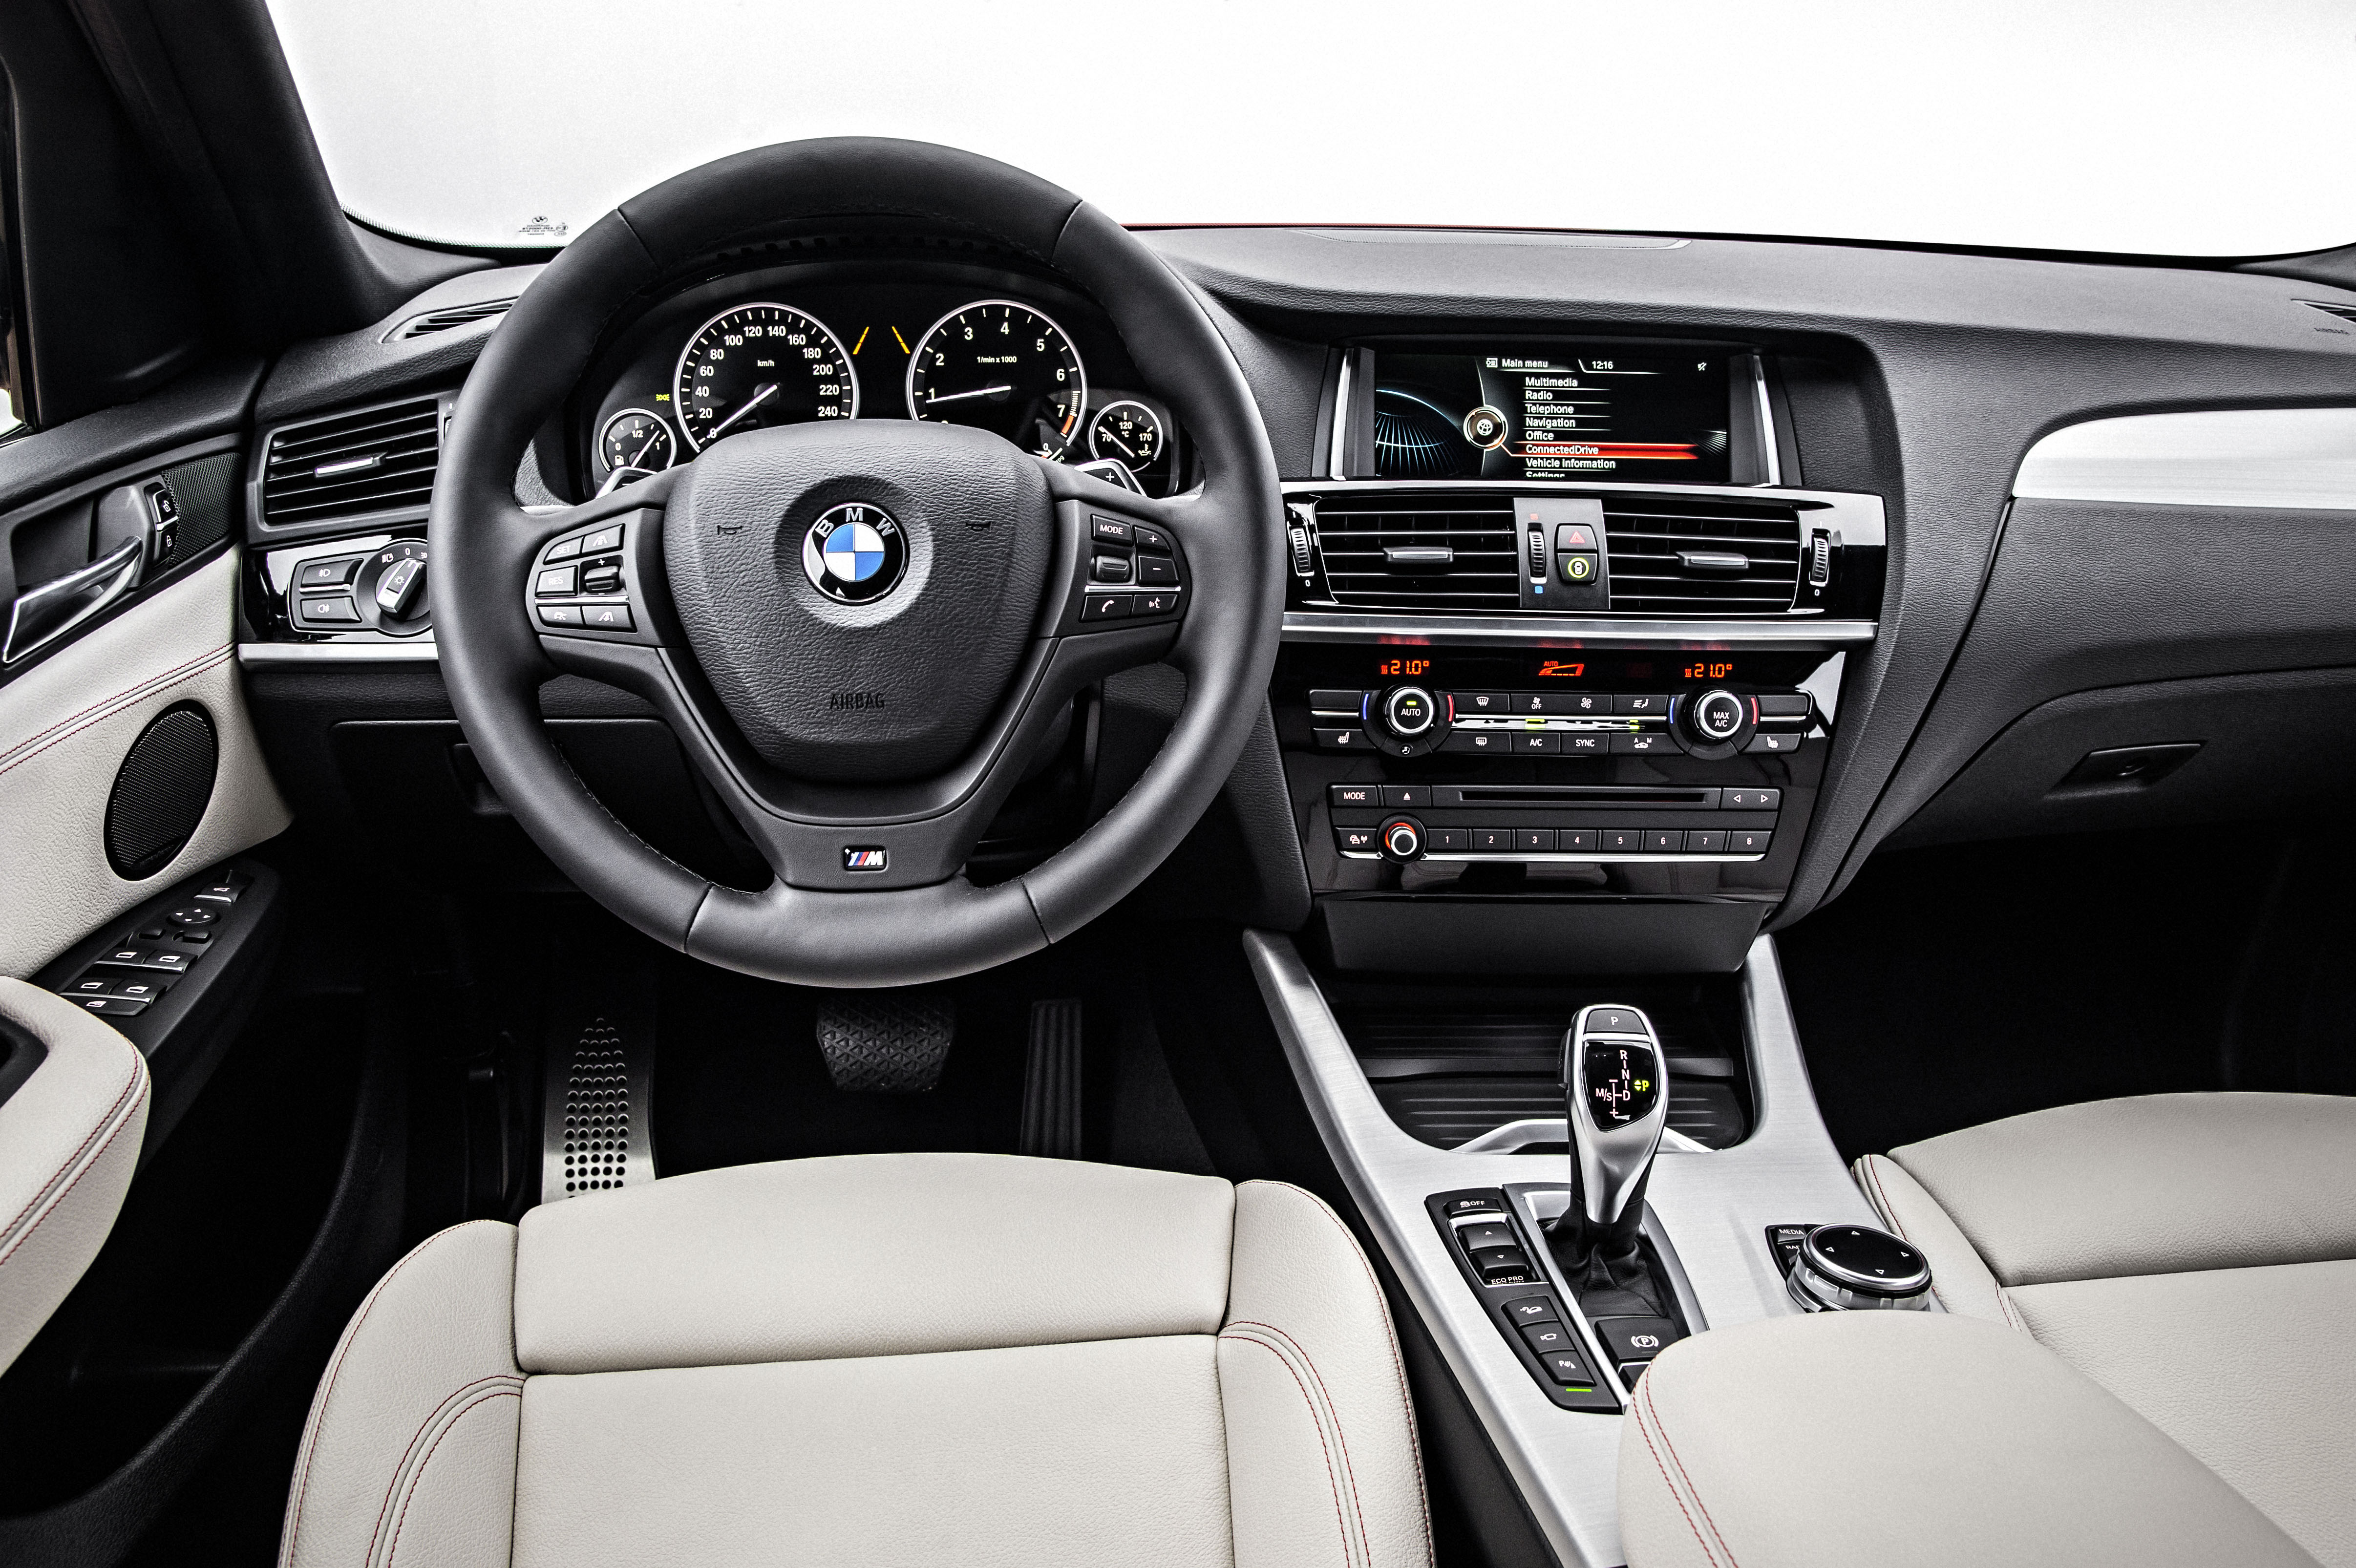 The dashboard layout is identical to the BMW X3's - which is no bad thing